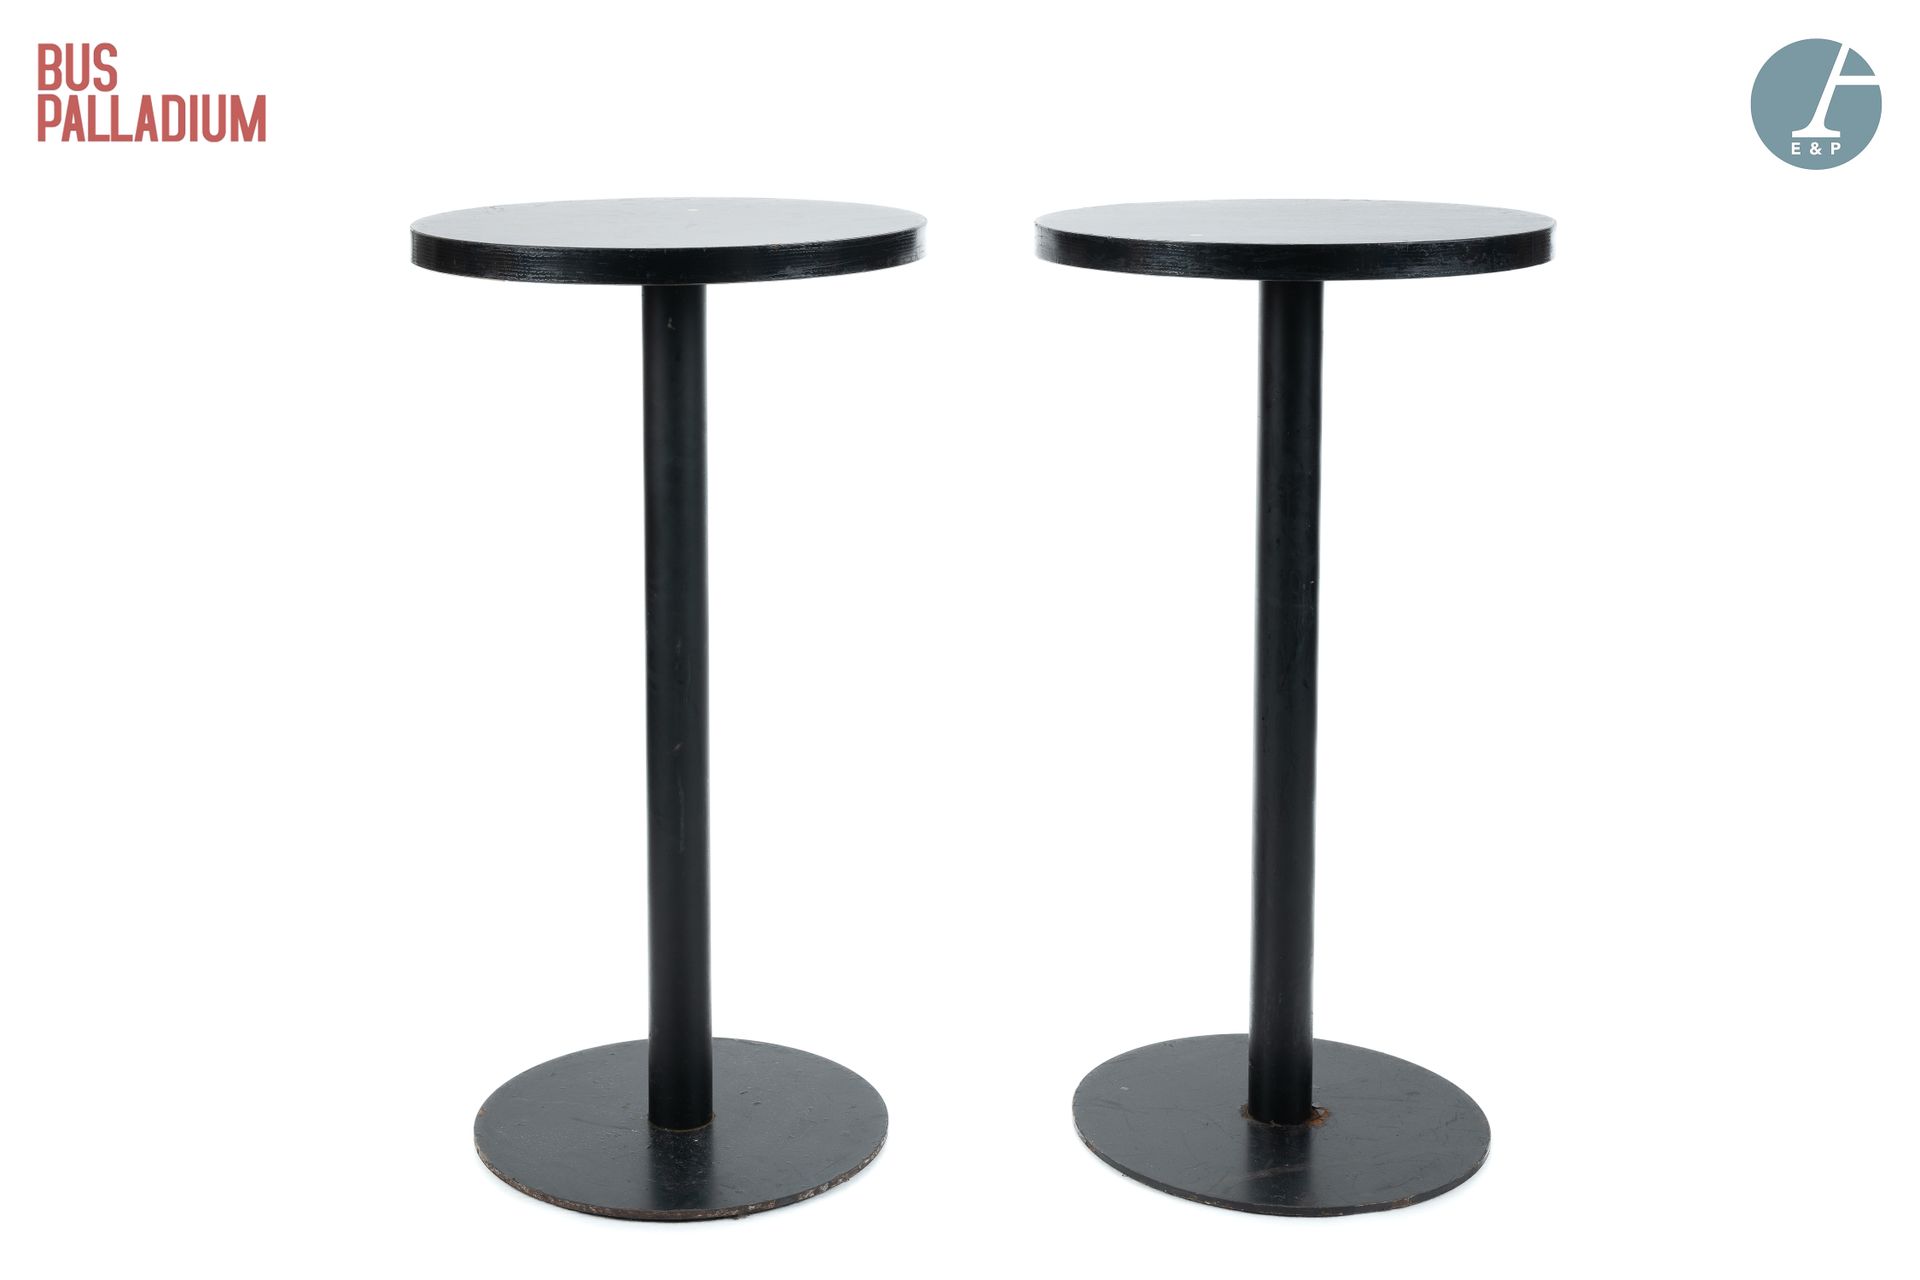 Null From the Bus Palladium concert hall



Pair of dining tables, the circular &hellip;